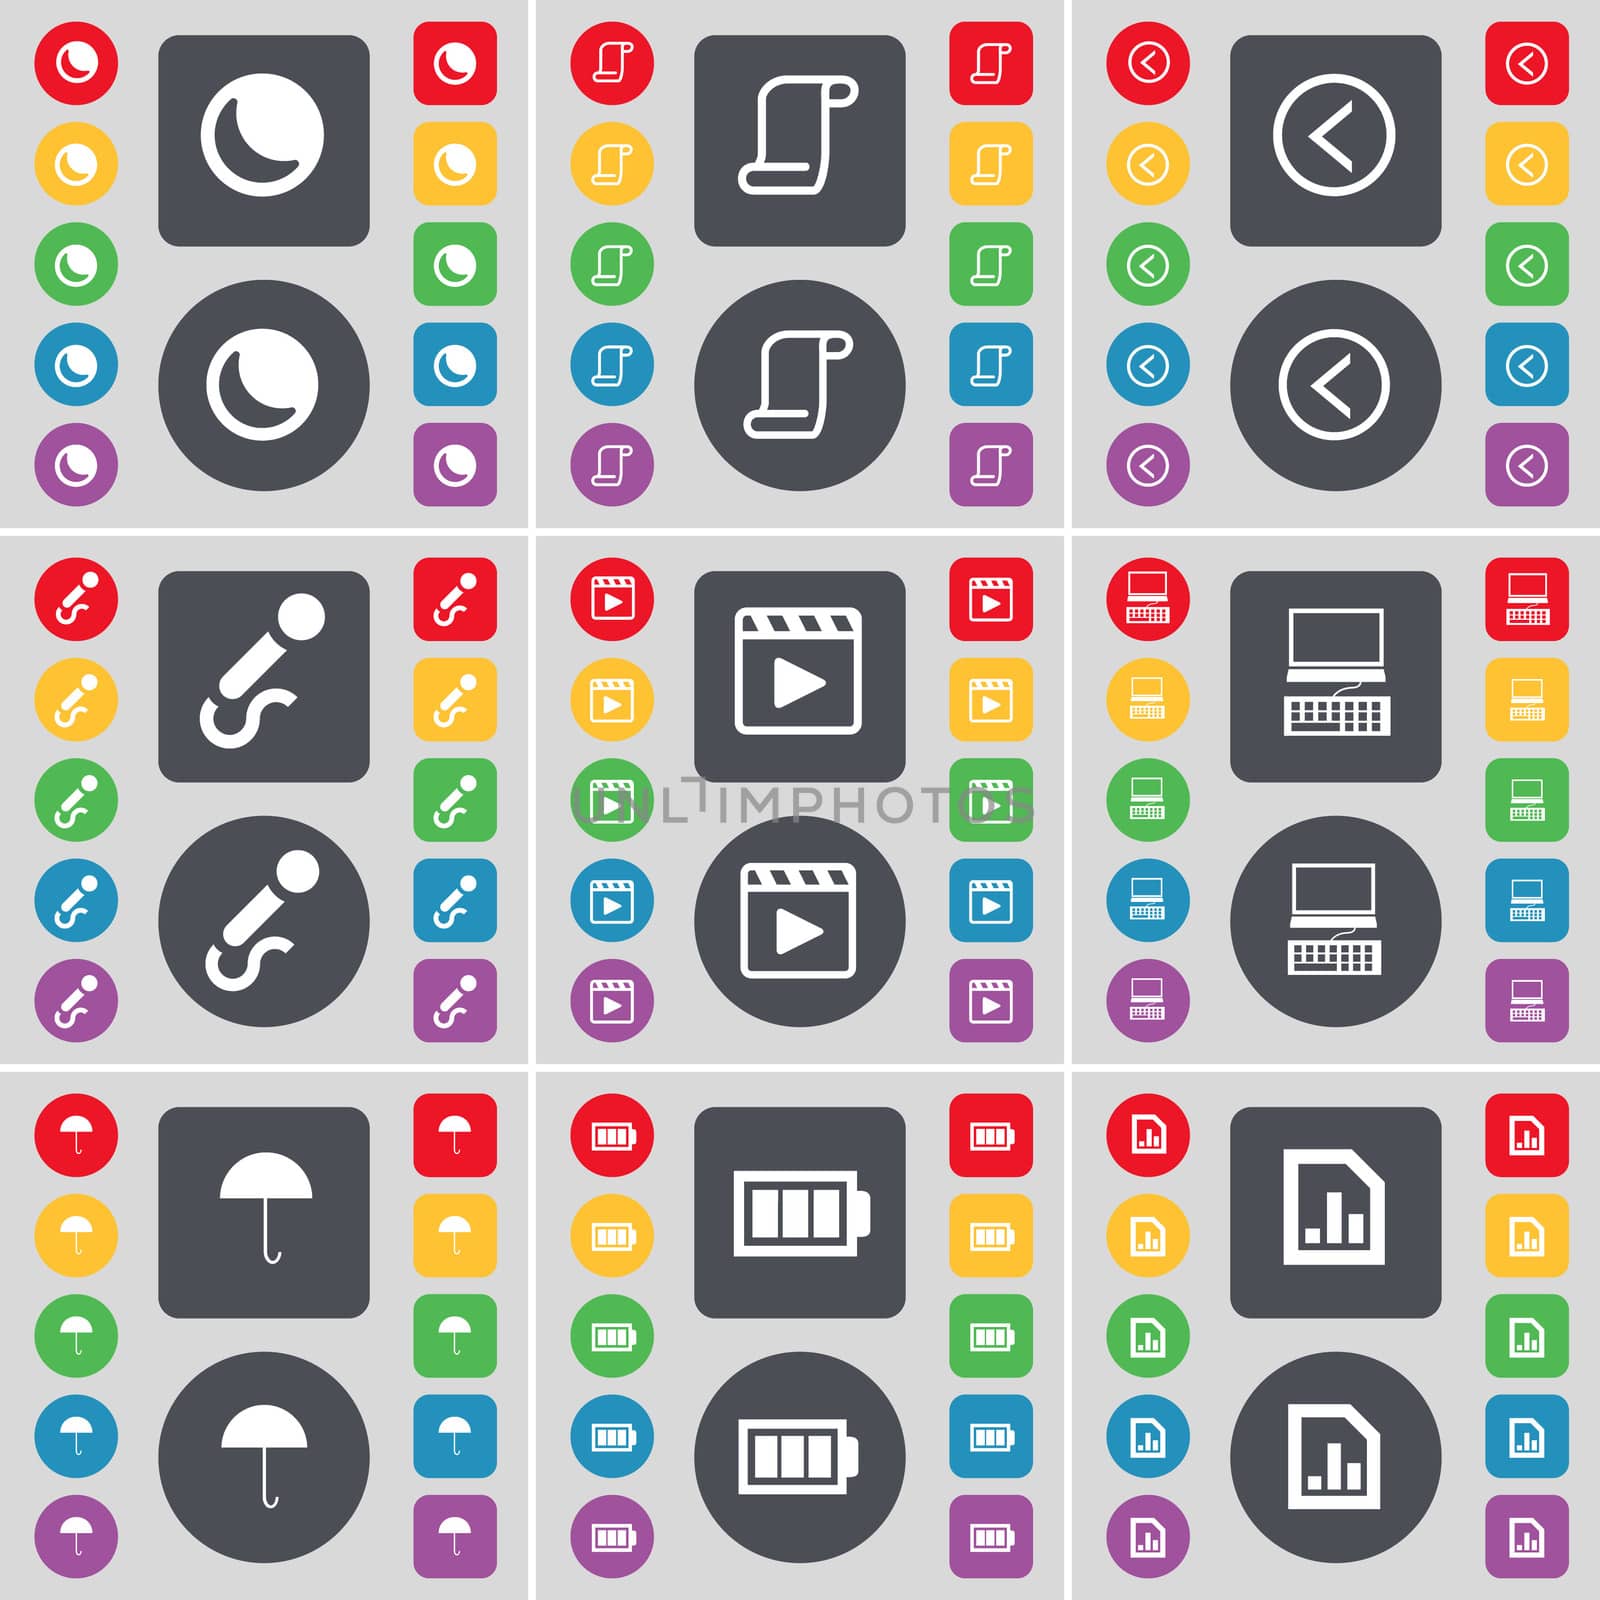 Moon, Scroll, Arrow left, Microphone, Media player, Laptop, Umbrella, Battery, Diagram file icon symbol. A large set of flat, colored buttons for your design.  by serhii_lohvyniuk